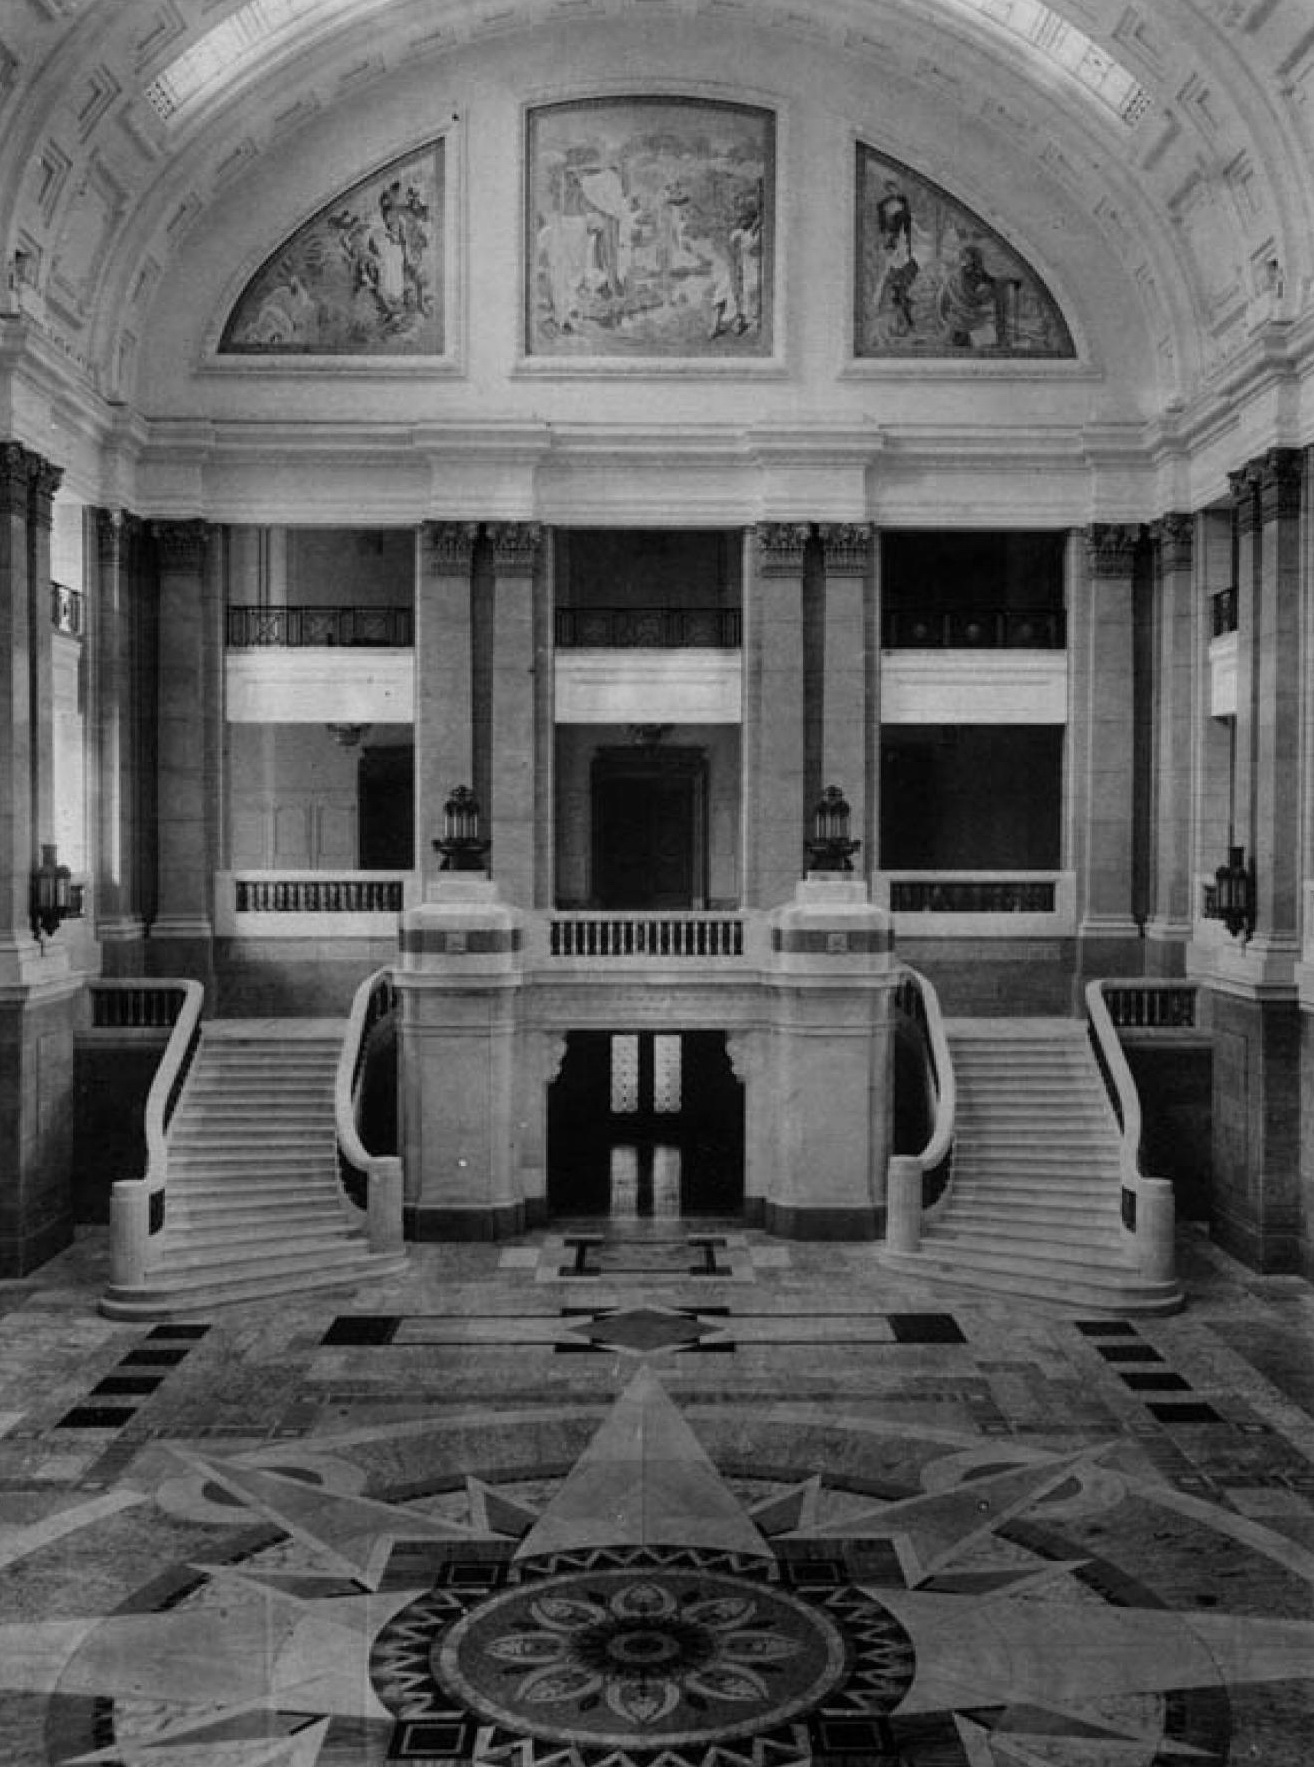 Interior of General Government Building, Keijo (now Seoul), Korea, 1926, photo 1 of 2